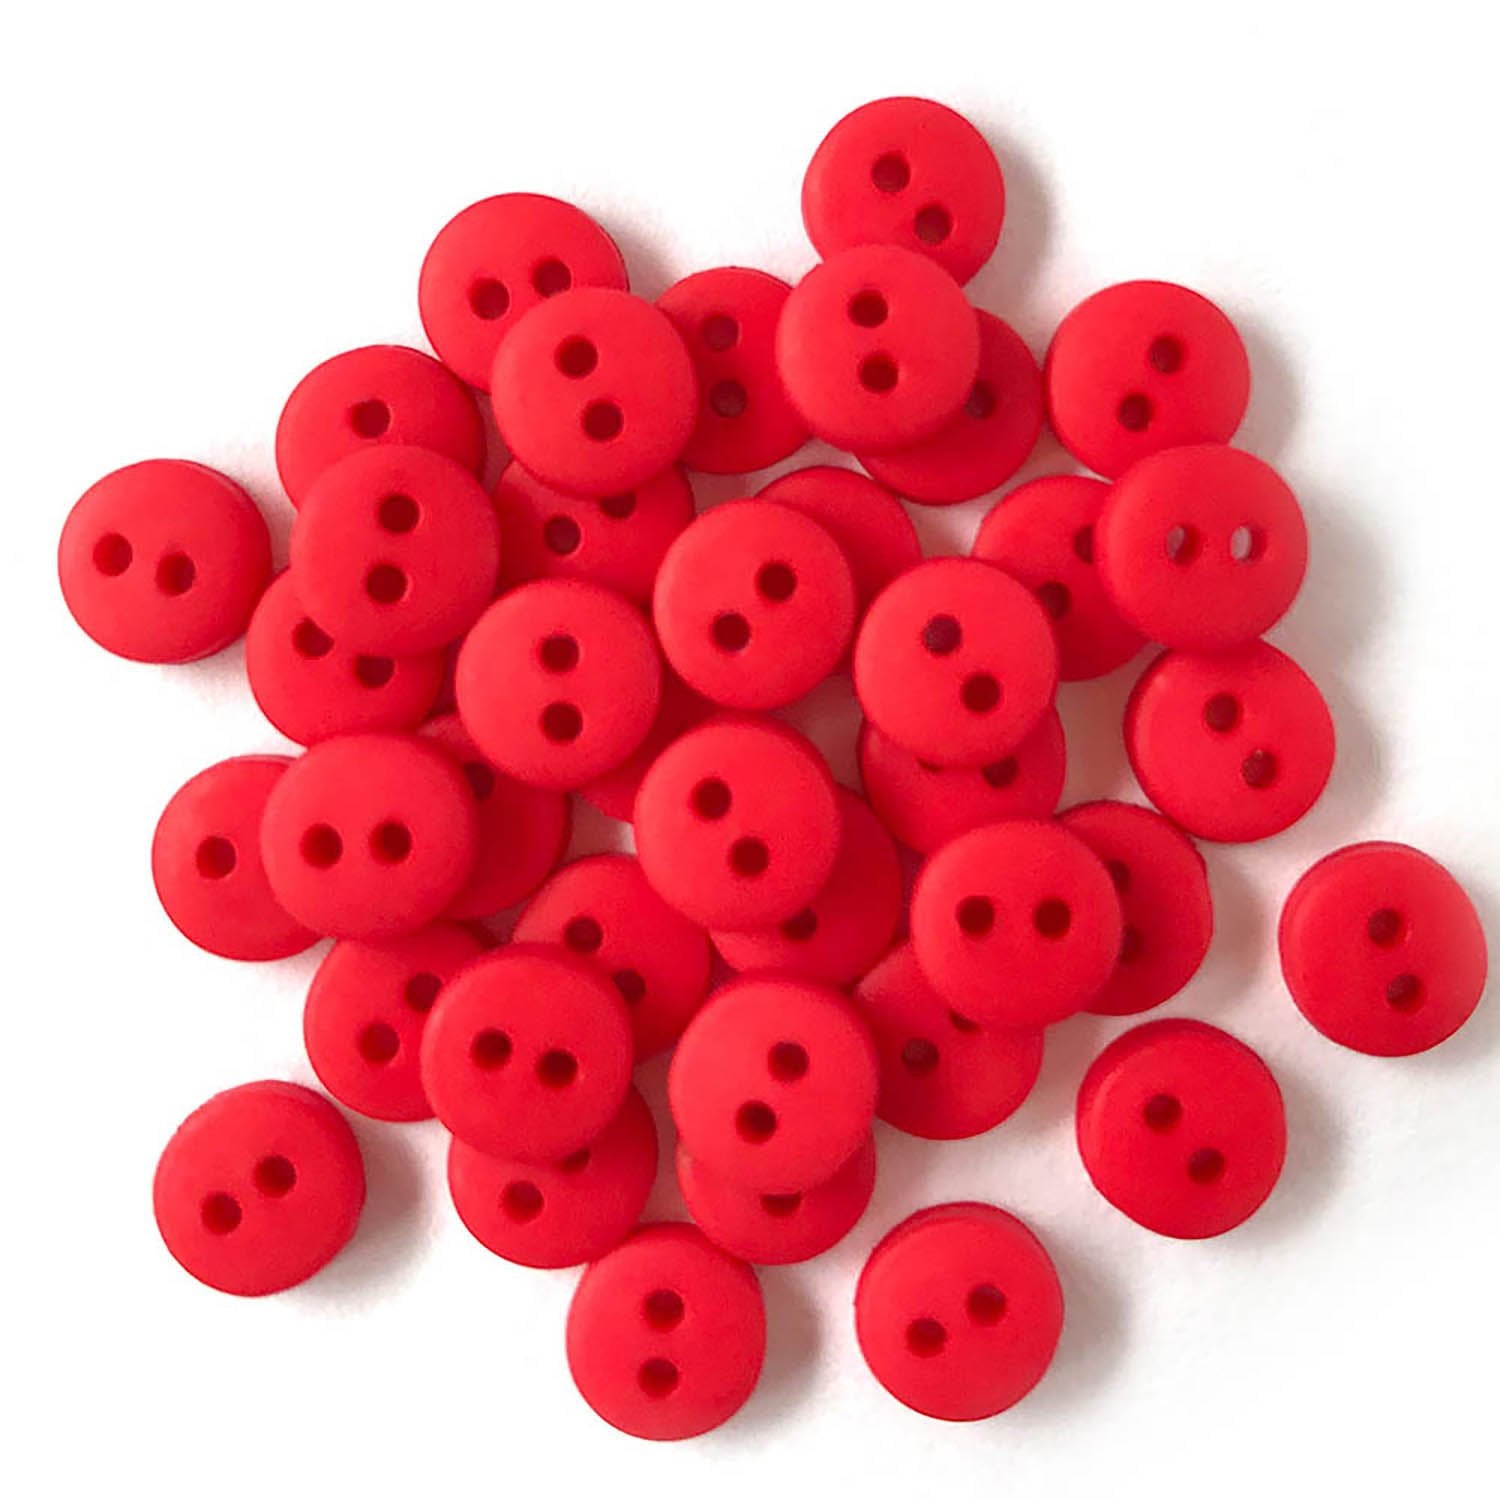 Pkg of 20 Plastic RED STAR Craft Buttons 1/2 (12mm) (2133